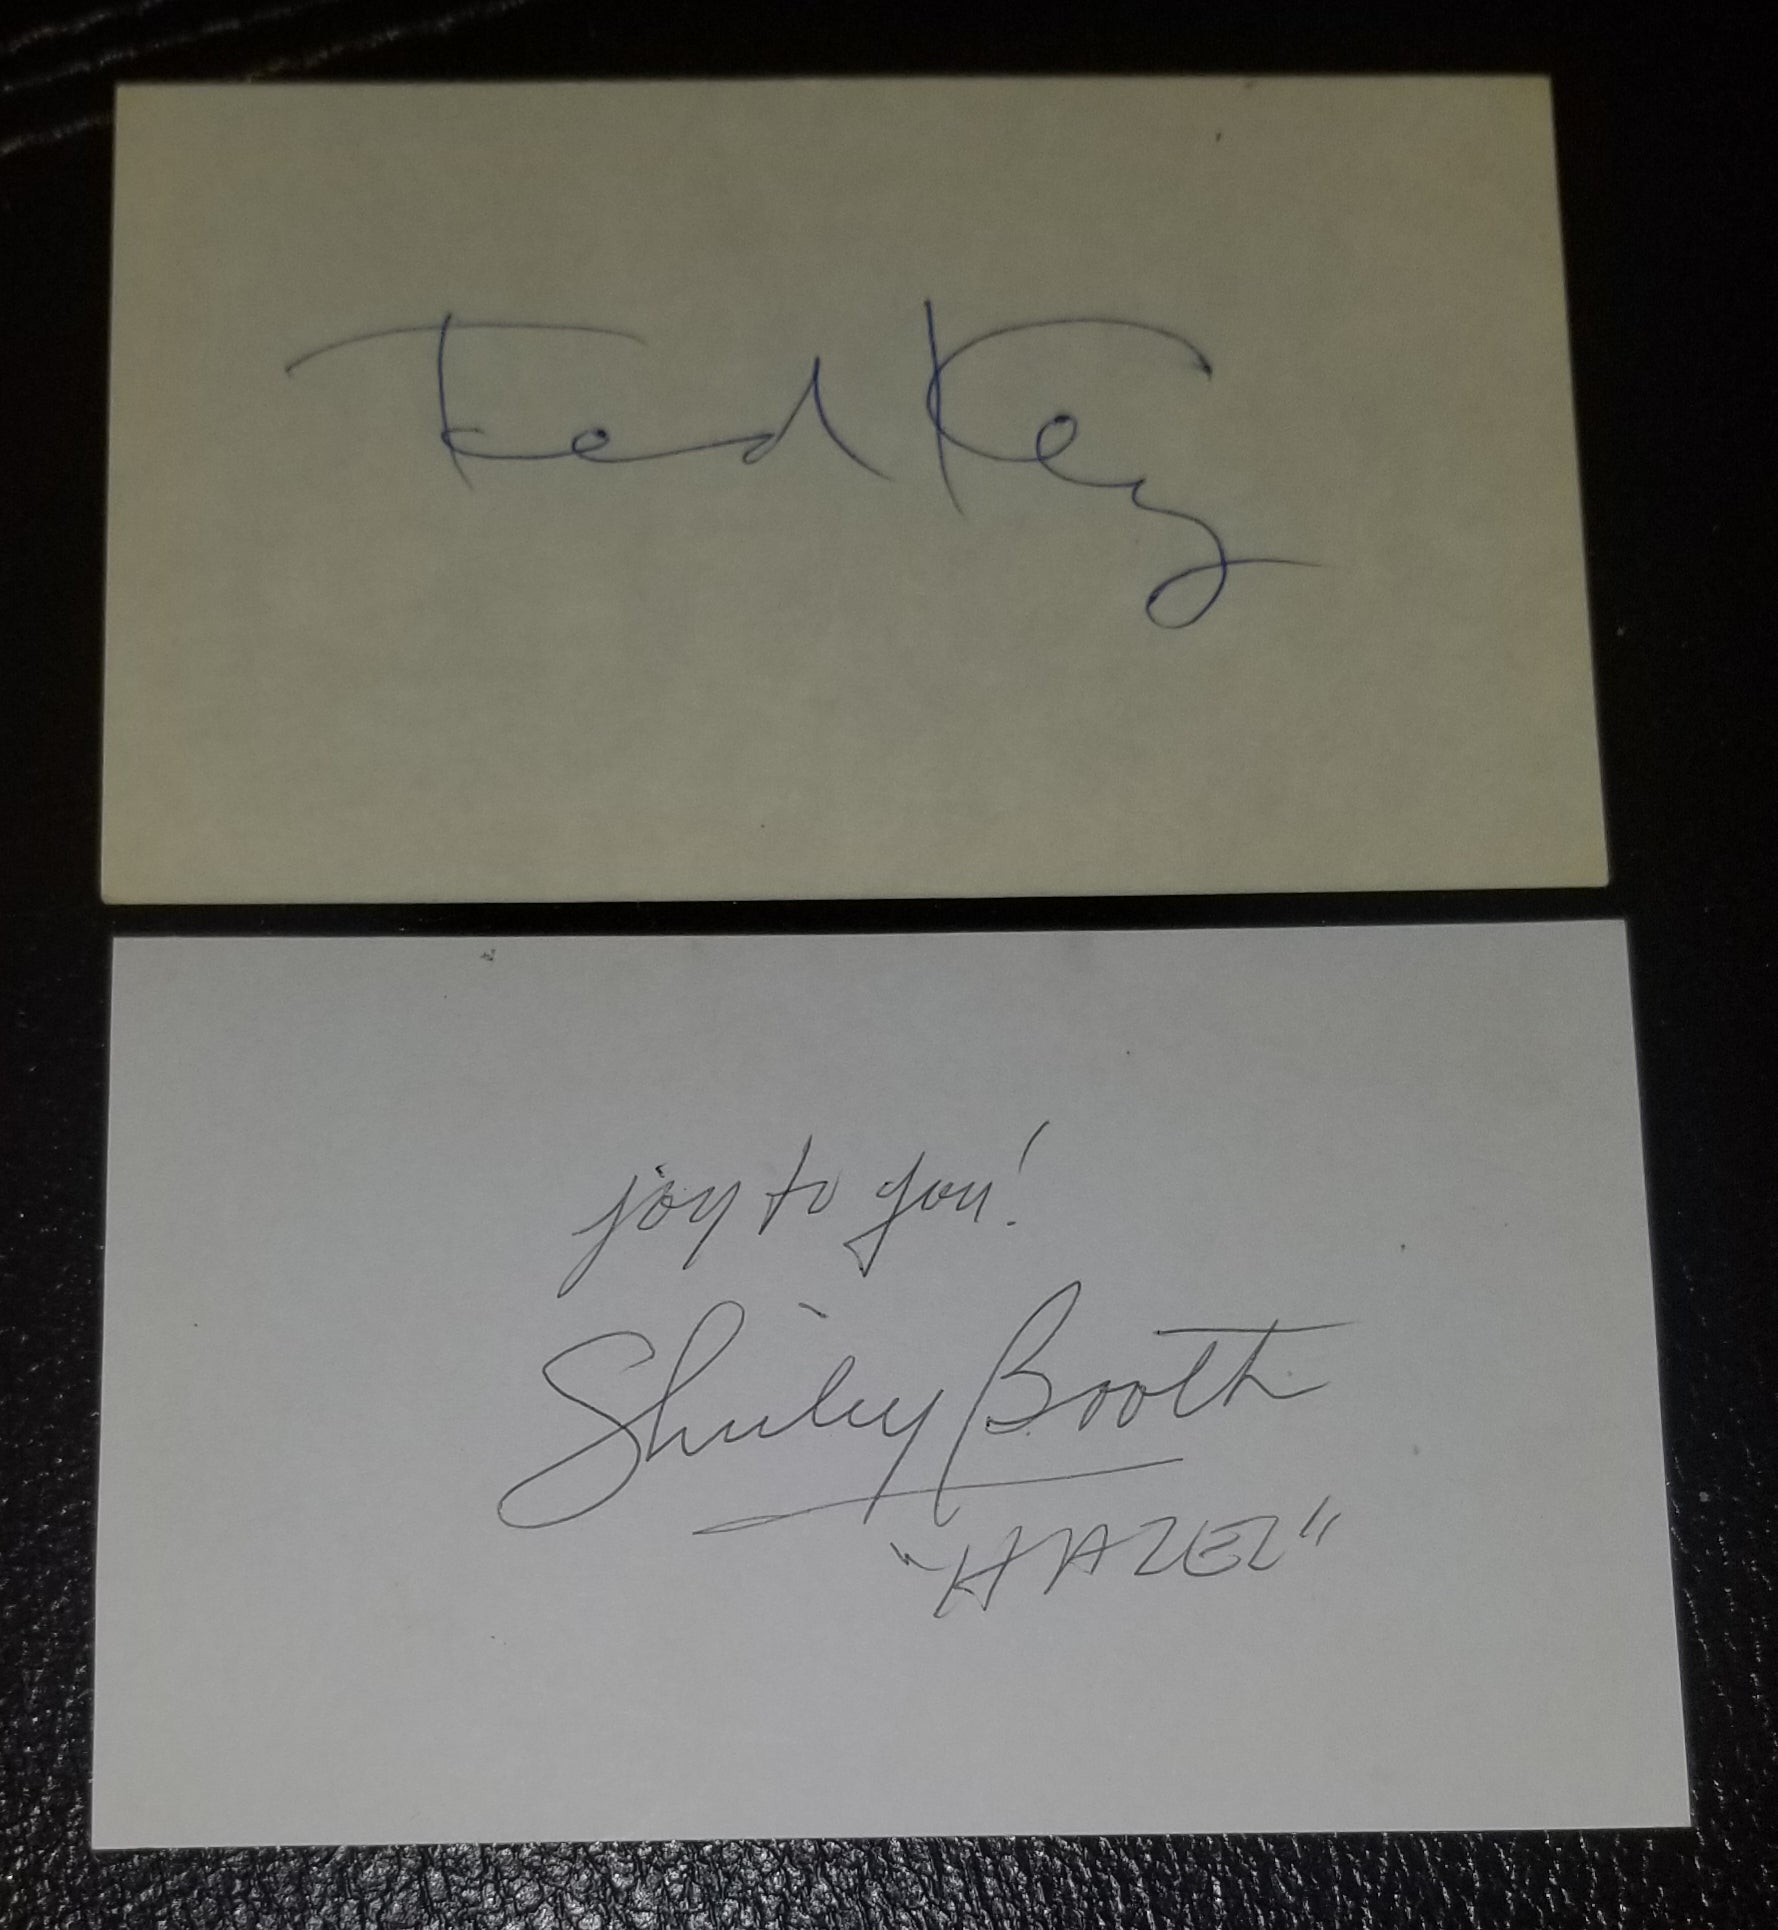 "HAZEL" CARTOONIST TED KEY D.2008 AND ACTRESS SHIRLEY BOOTH D.1992 HAND SIGNED CARDS